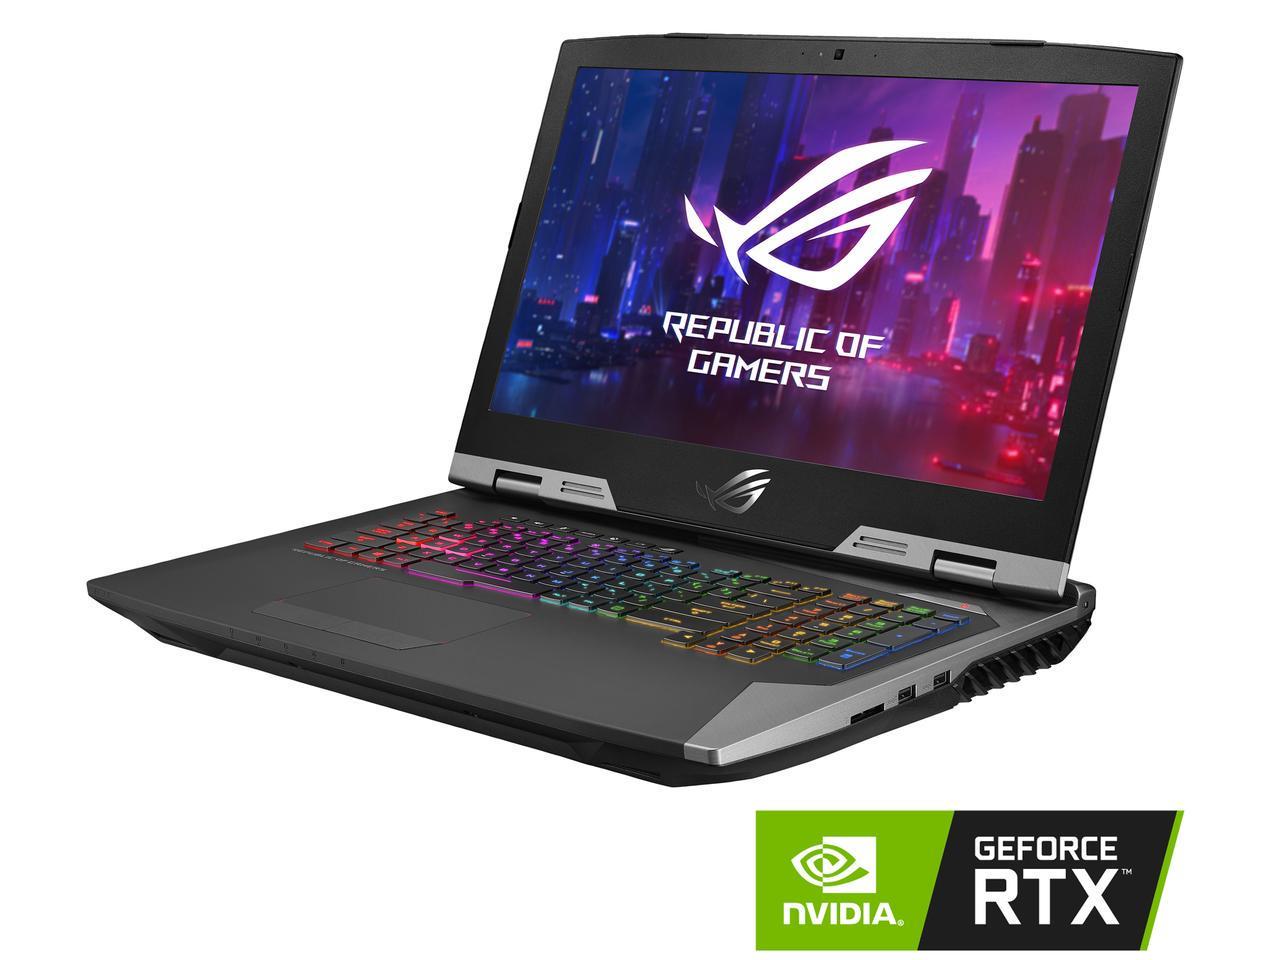 Asus ROG G703GX with GeForce RTX 2080 graphics is $600 off right now, costs less than Razer Blade Pro - NotebookCheck.net News